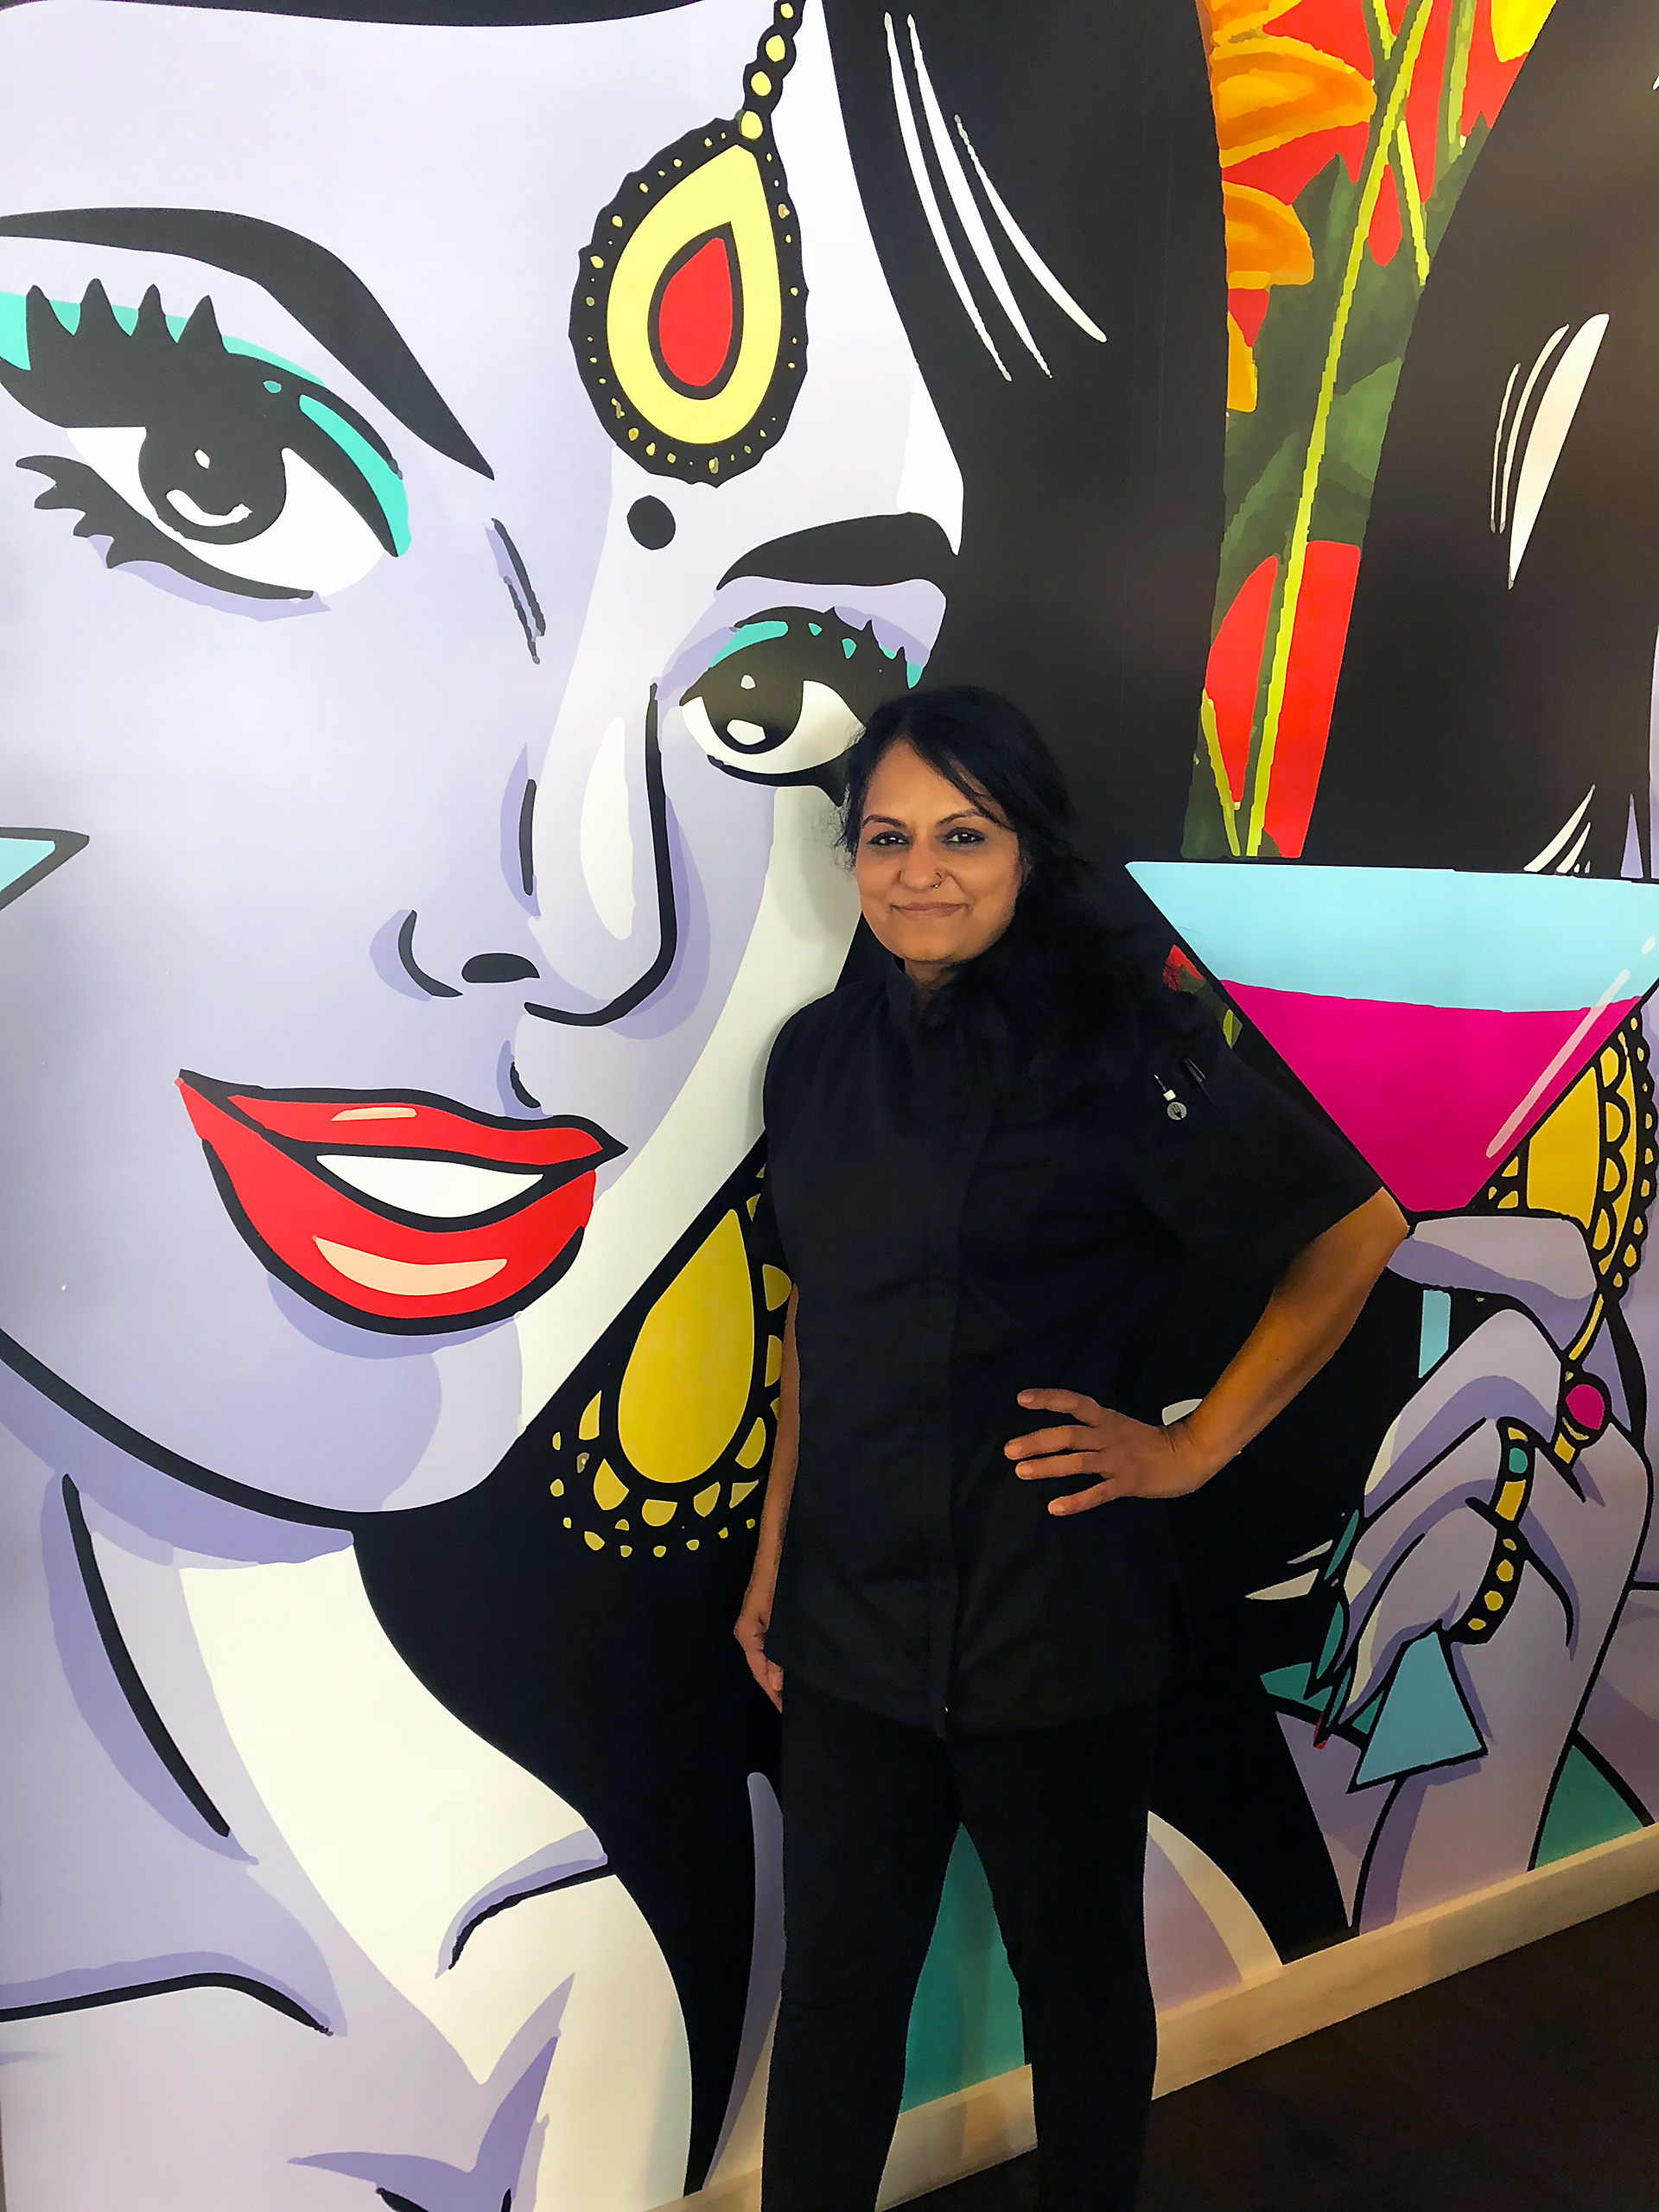 Chef and Partner Heena Patel in front of pop-art mural by HateCopy’s Maria Qamar